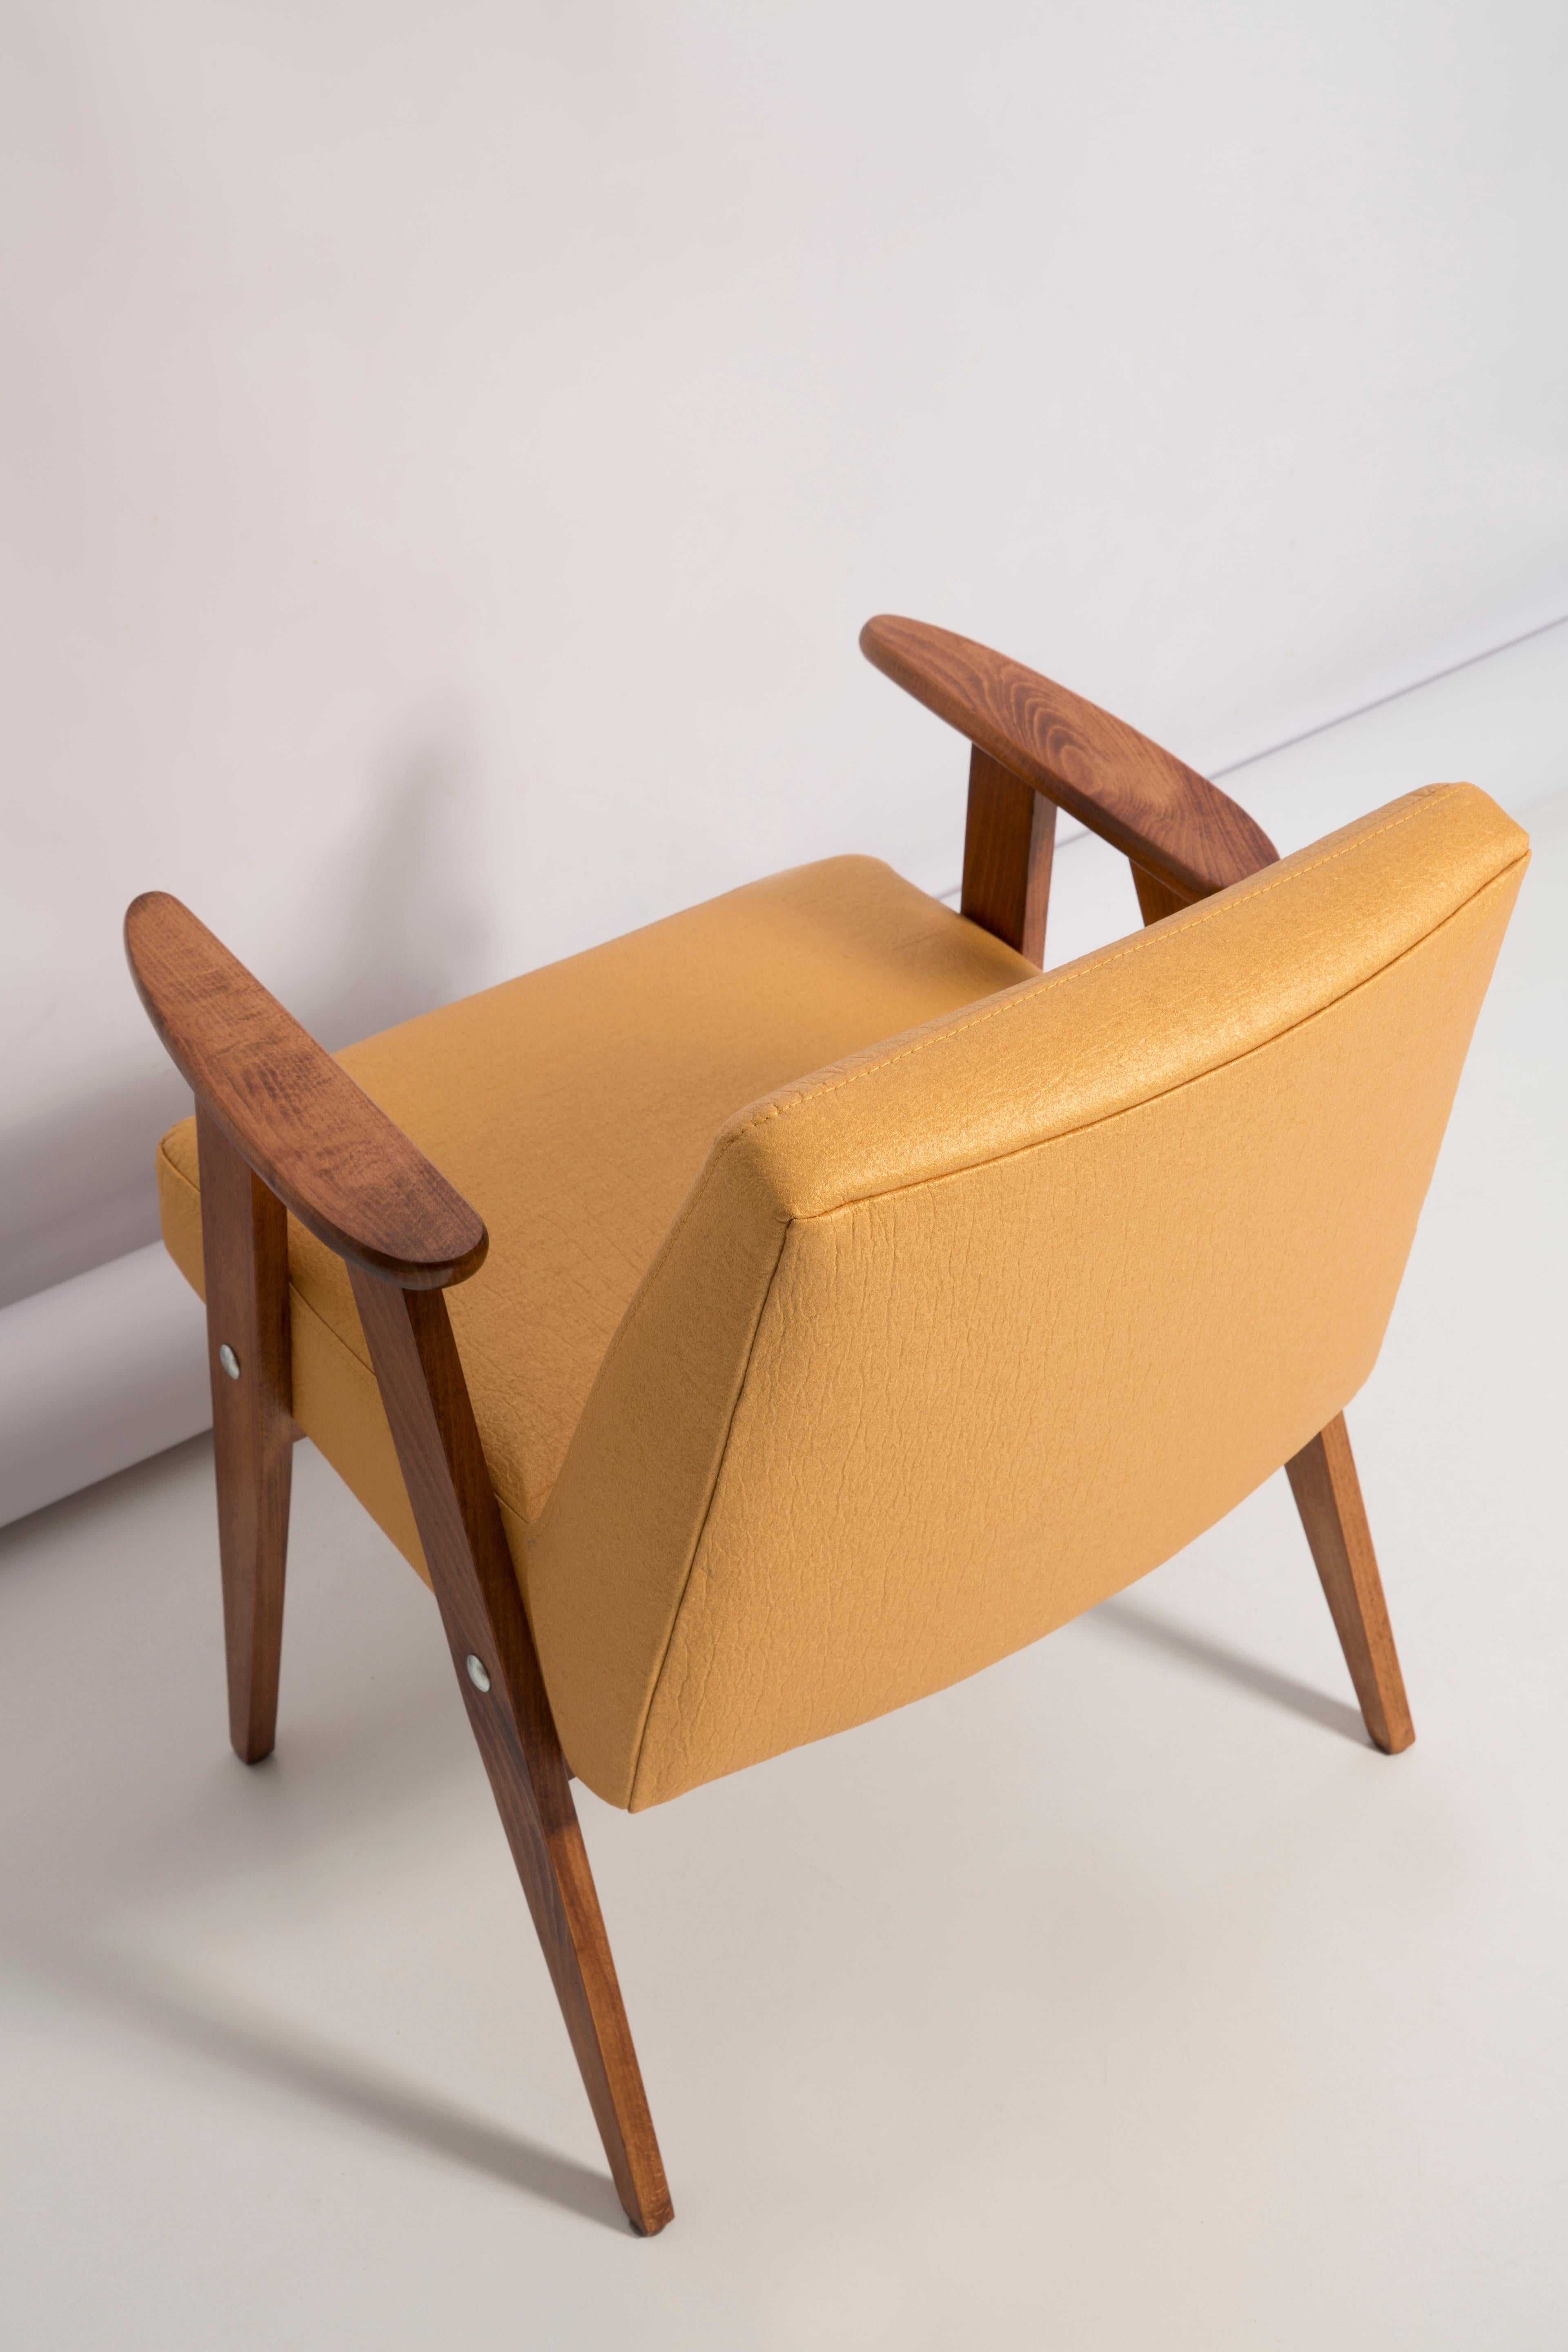 Midcentury 366 Club Armchair in Gold Pineapple Leather, Jozef Chierowski, 1960s For Sale 10